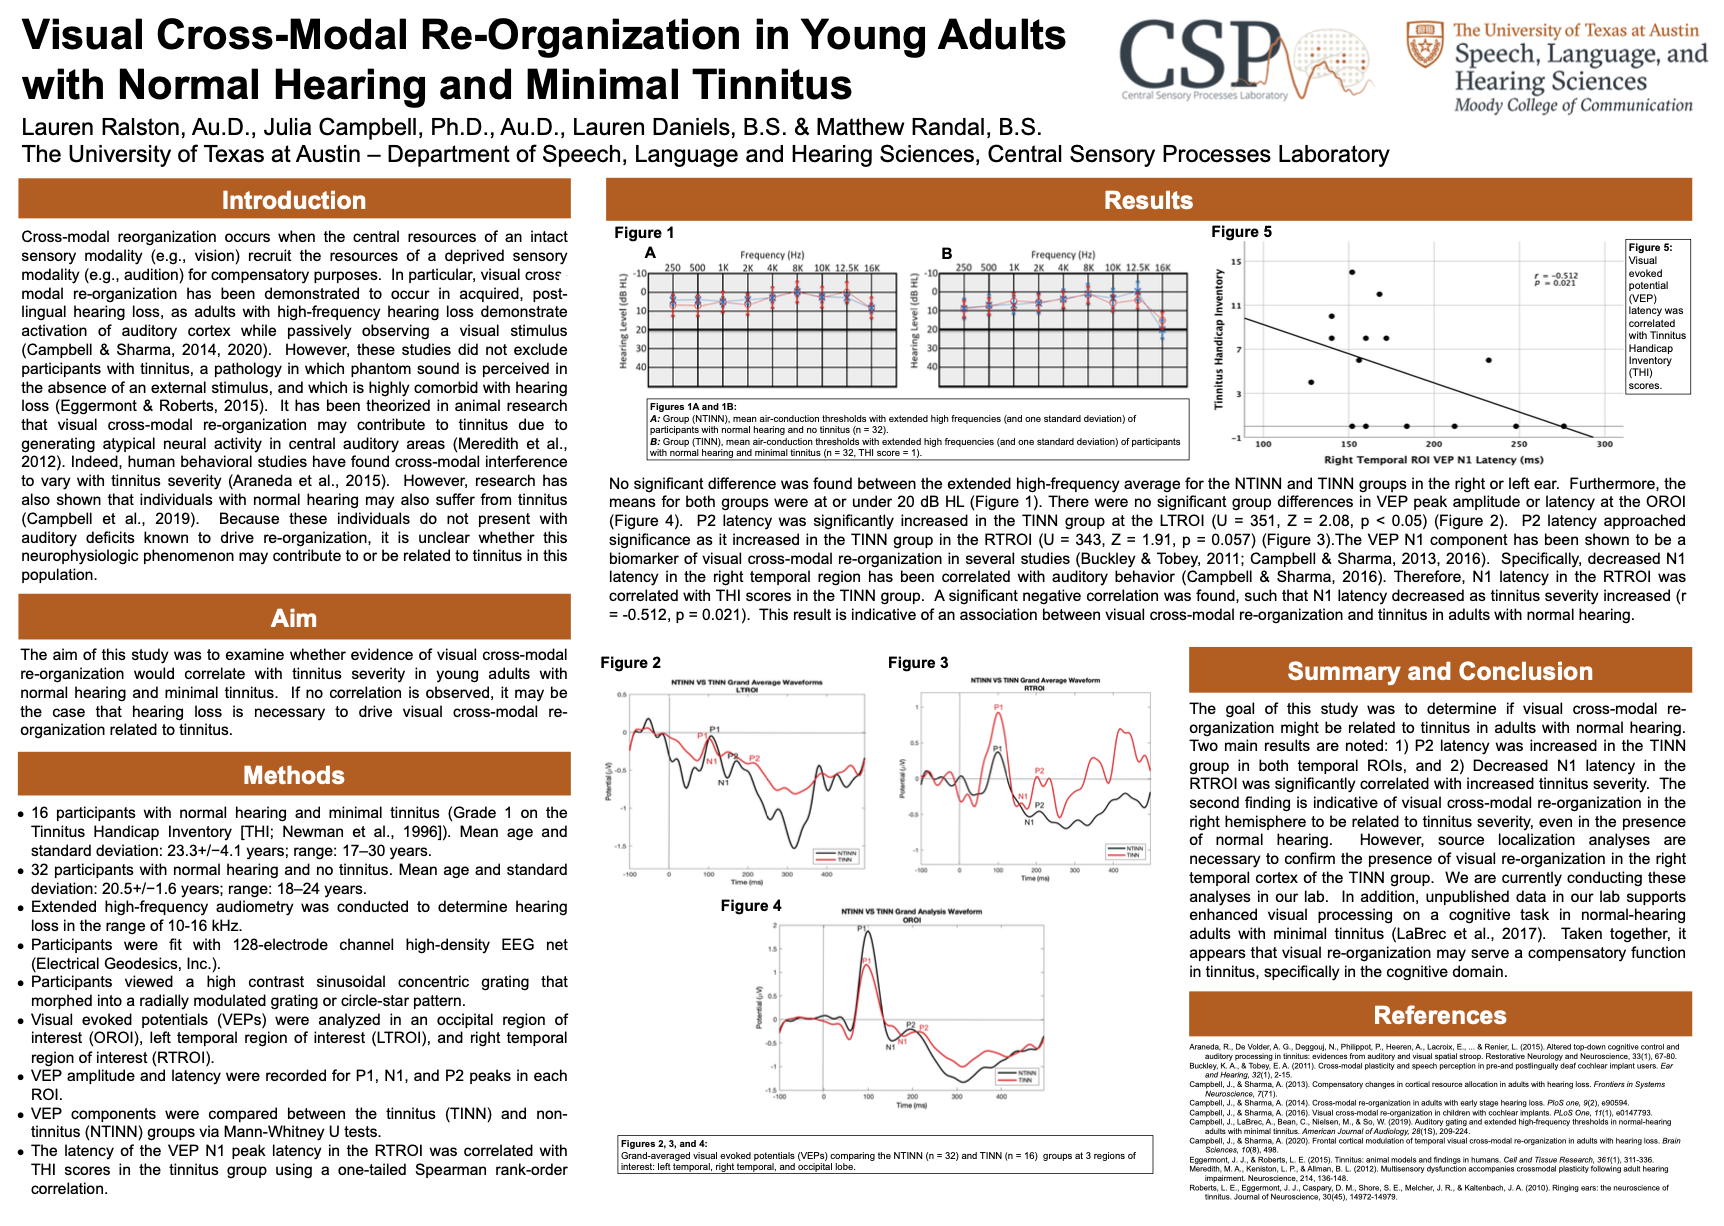 poster for VCMR study 